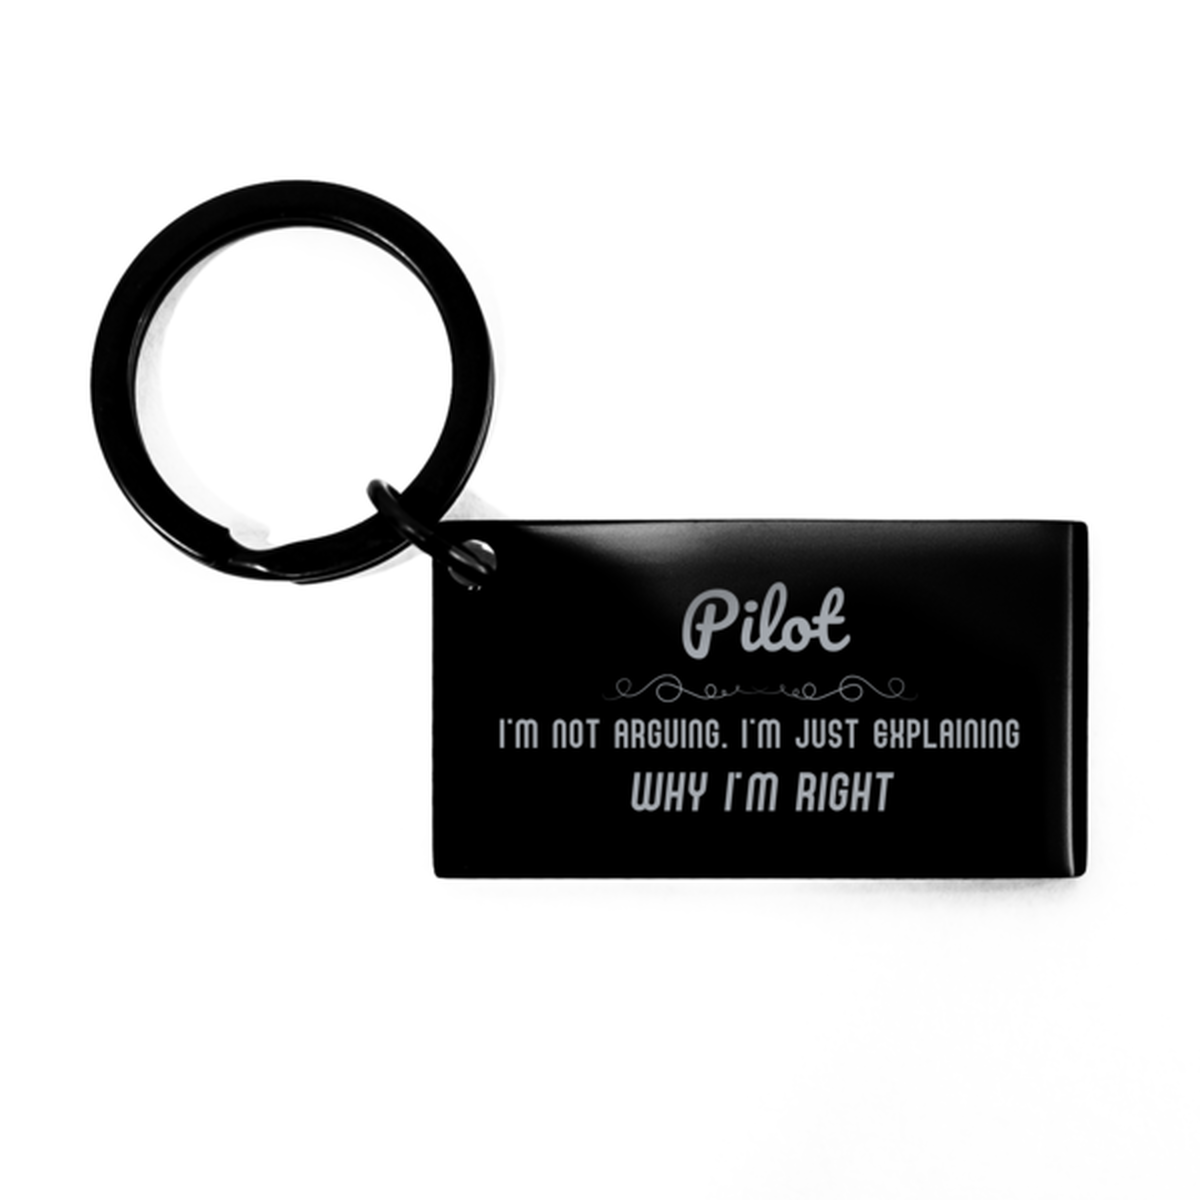 Pilot I'm not Arguing. I'm Just Explaining Why I'm RIGHT Keychain, Funny Saying Quote Pilot Gifts For Pilot Graduation Birthday Christmas Gifts for Men Women Coworker